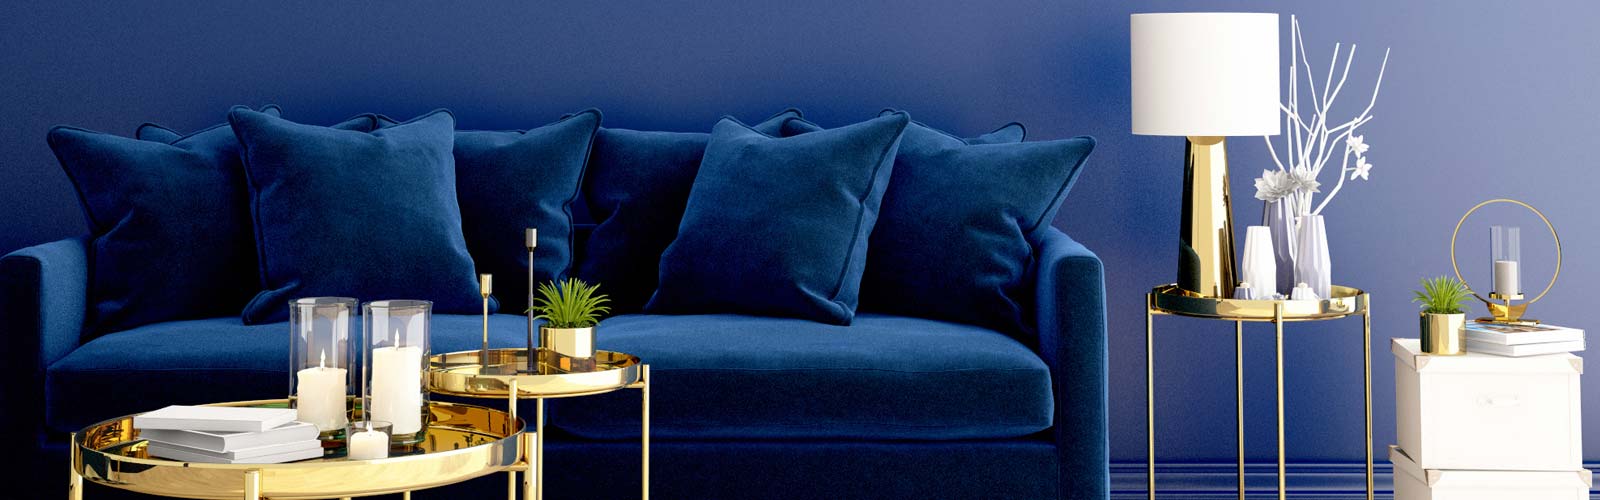 Blue velvet sofa behind gold coffee tables against blue wall in Pantone Color of the Year Classic Blue